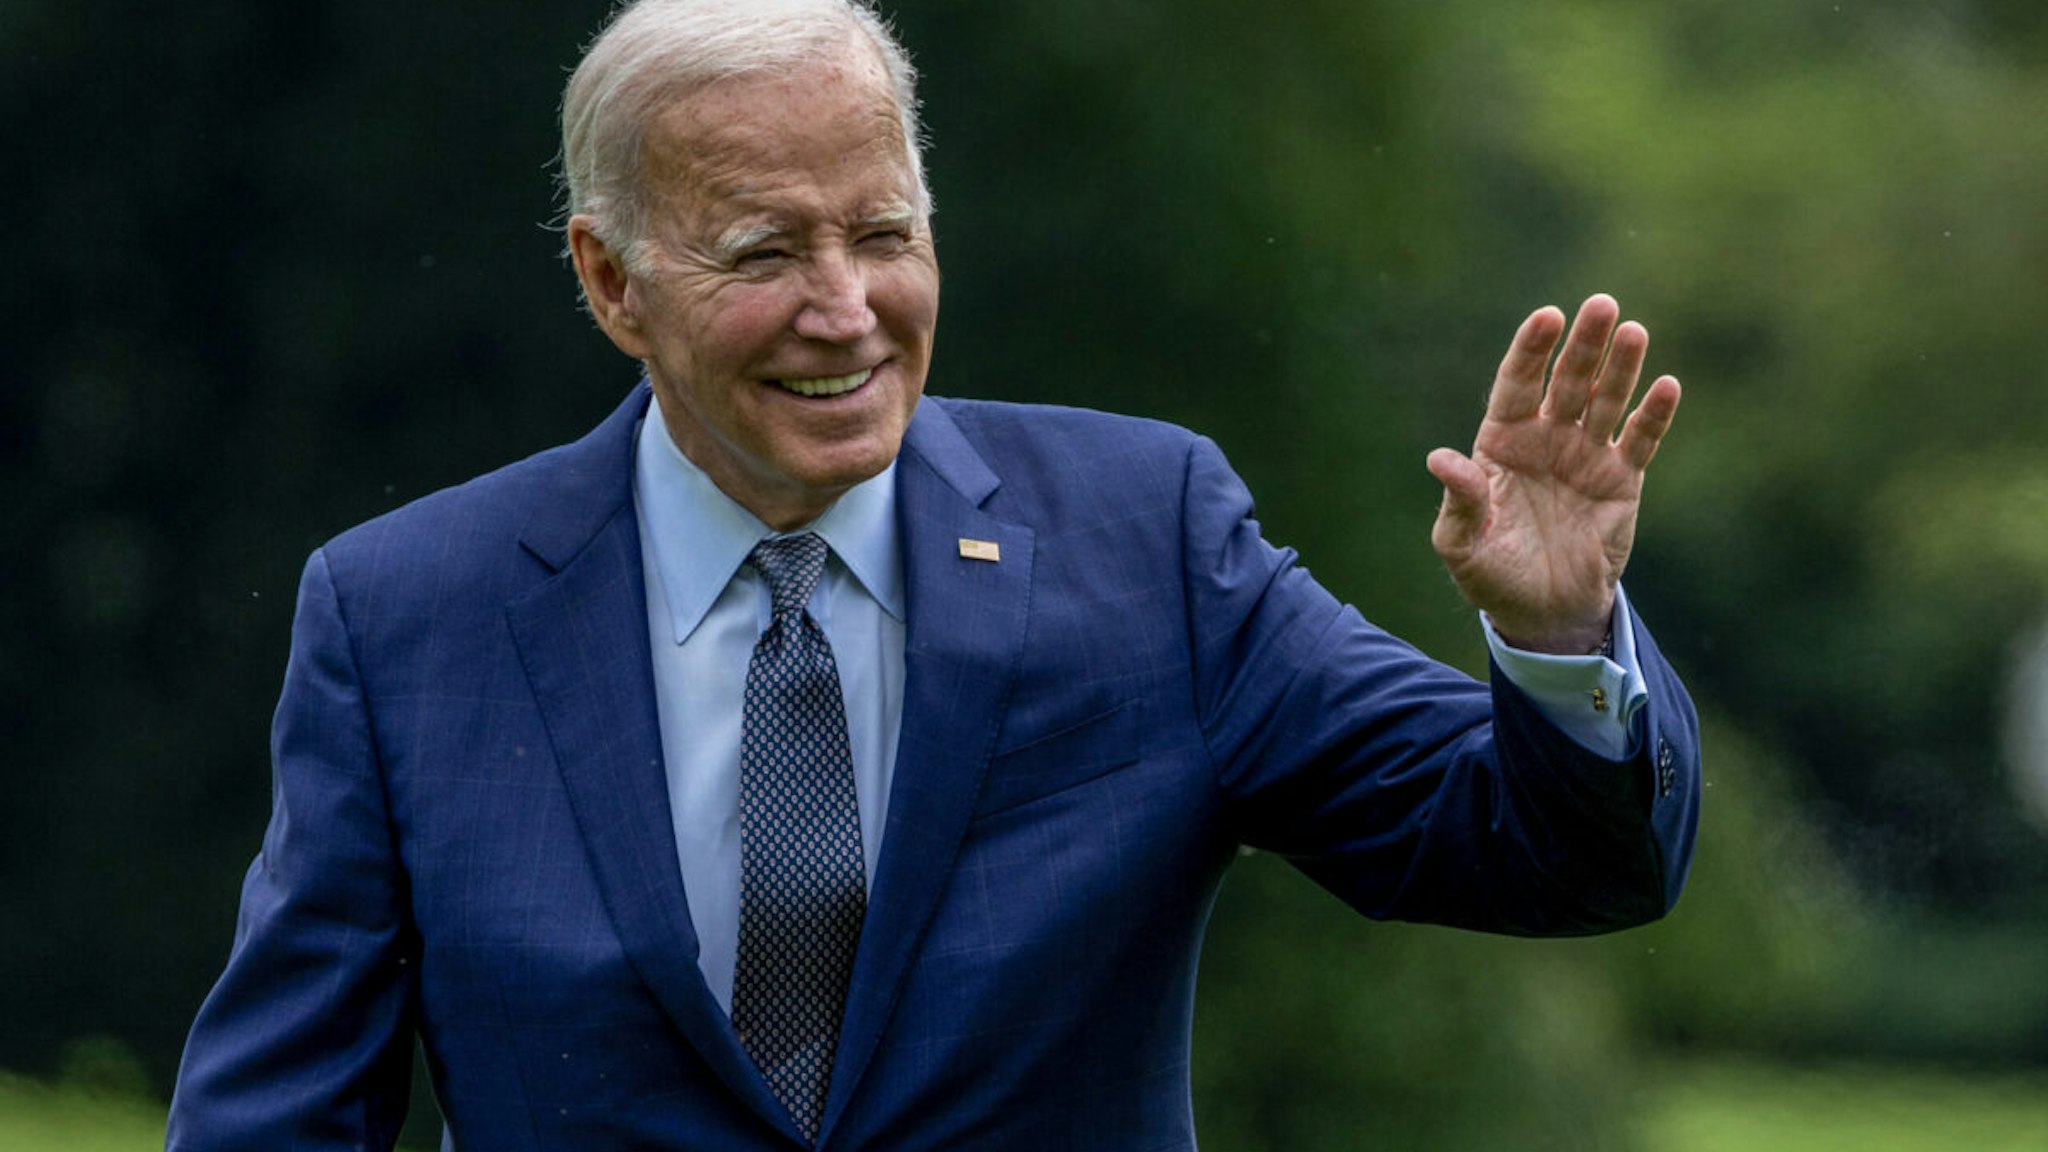 WASHINGTON, DC - SEPTEMBER 17: U.S. President Joe Biden arrives on the south lawn of the White House on September 17, 2023 in Washington, DC. The President spent the weekend in Delaware and is heading to New York City later in the day for the United Nations General Assembly.